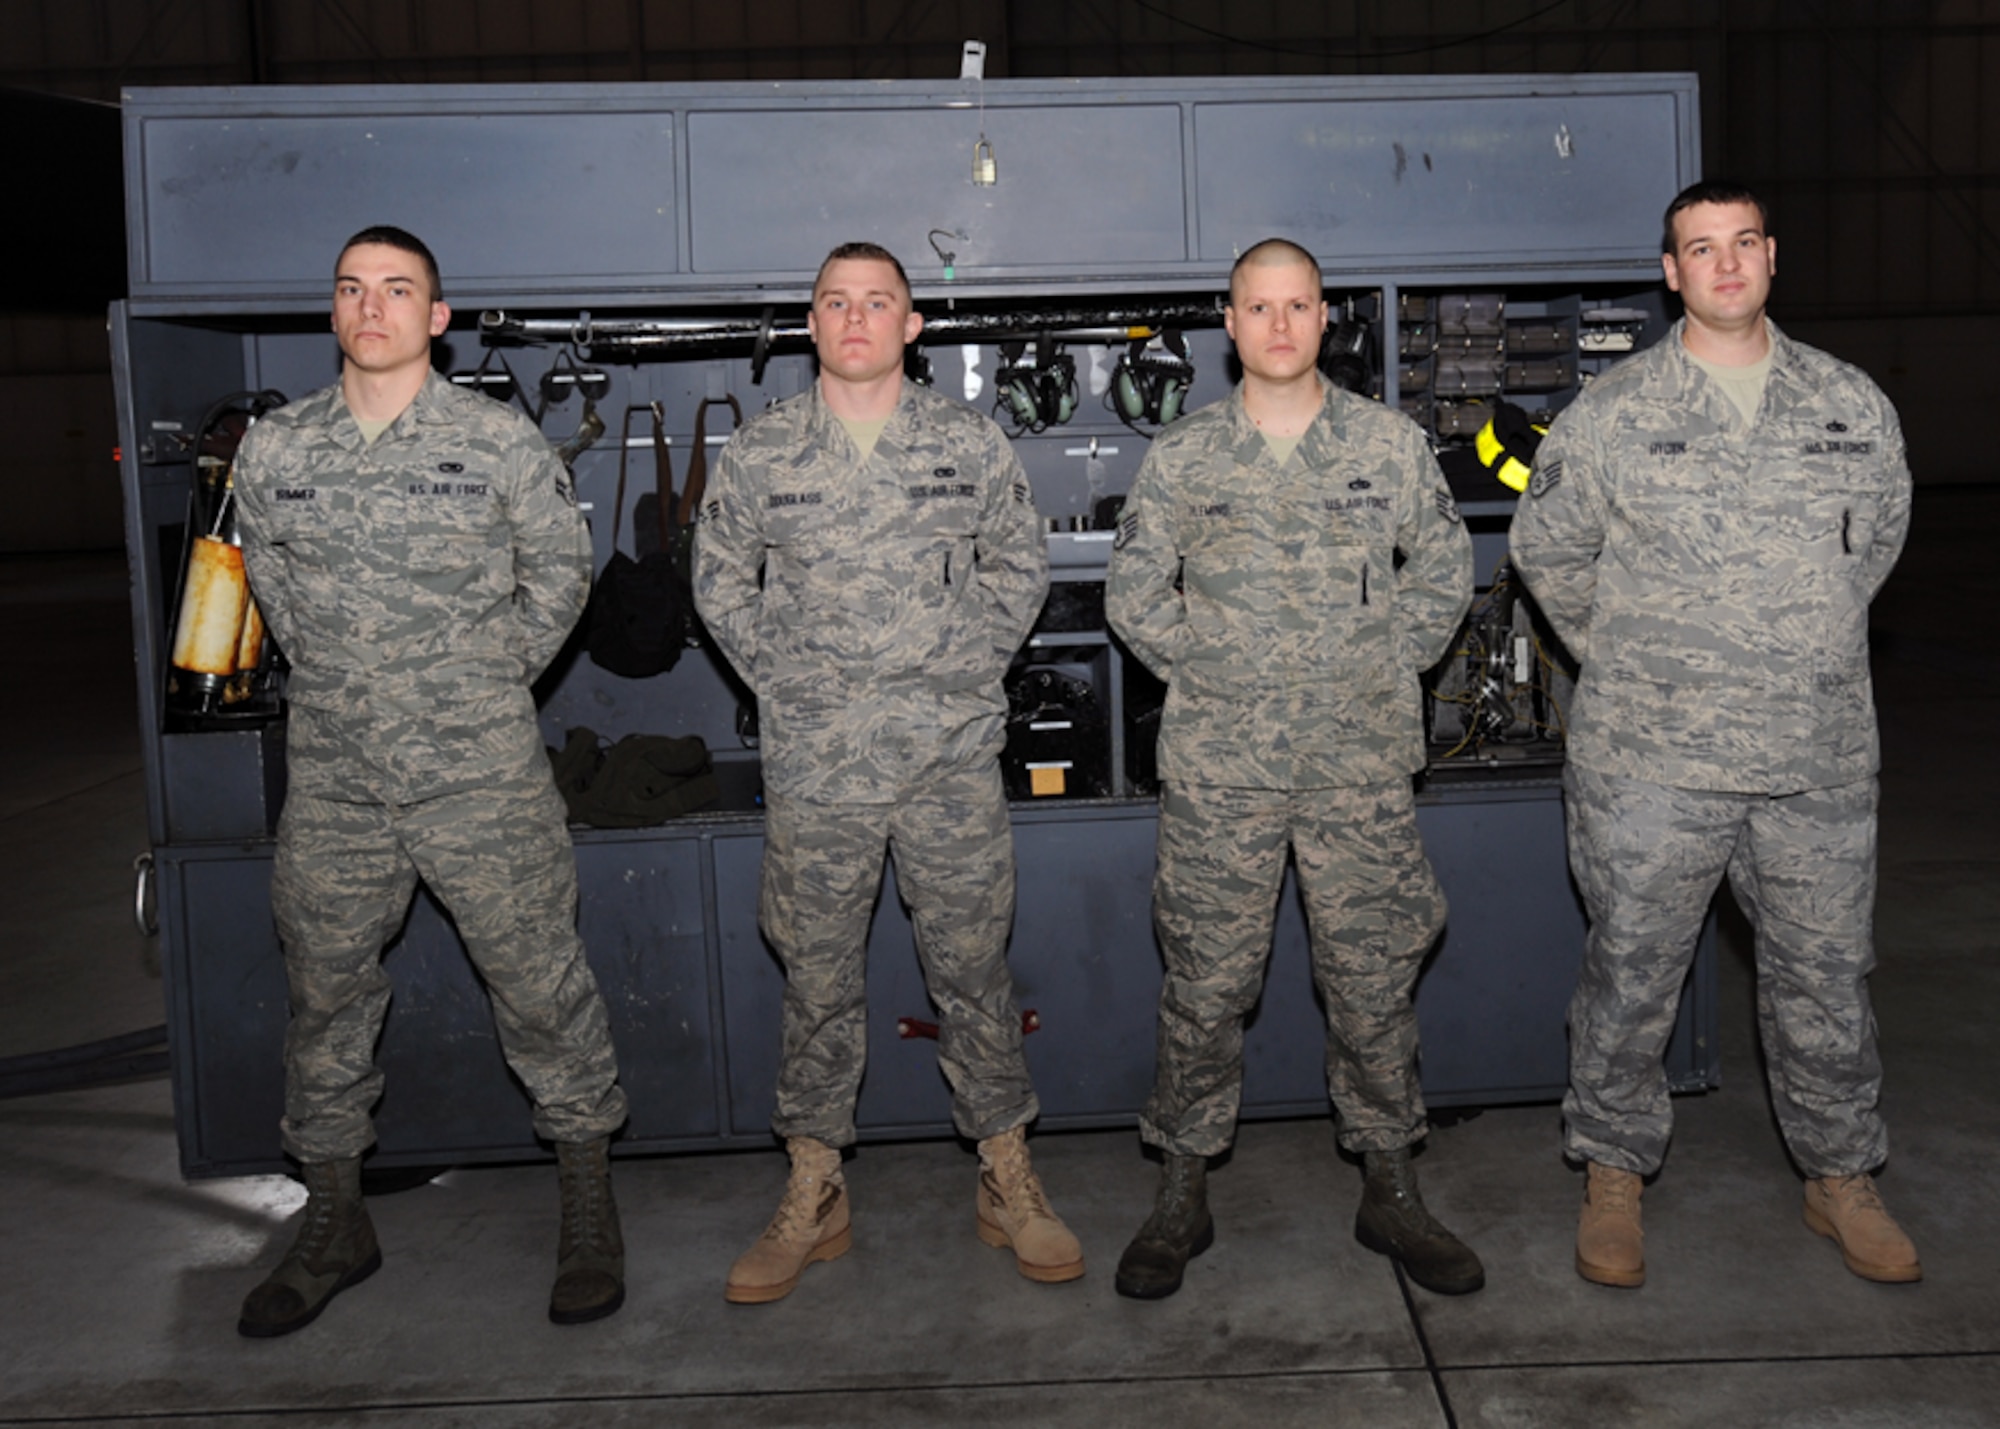 MINOT AIR FORCE BASE, N.D. – Crew 26 won the load crew of the quarter competition here Feb. 5. The members of the Crew 26 weapons loading team were: Airman 1st Class Matthew Brimmer, Senior Airman Dennis Douglass, Staff Sgt. Joseph Fleming and Staff Sgt. Dustin Hayden. (U.S. Air Force photo by Senior Airman Sharida Jackson)